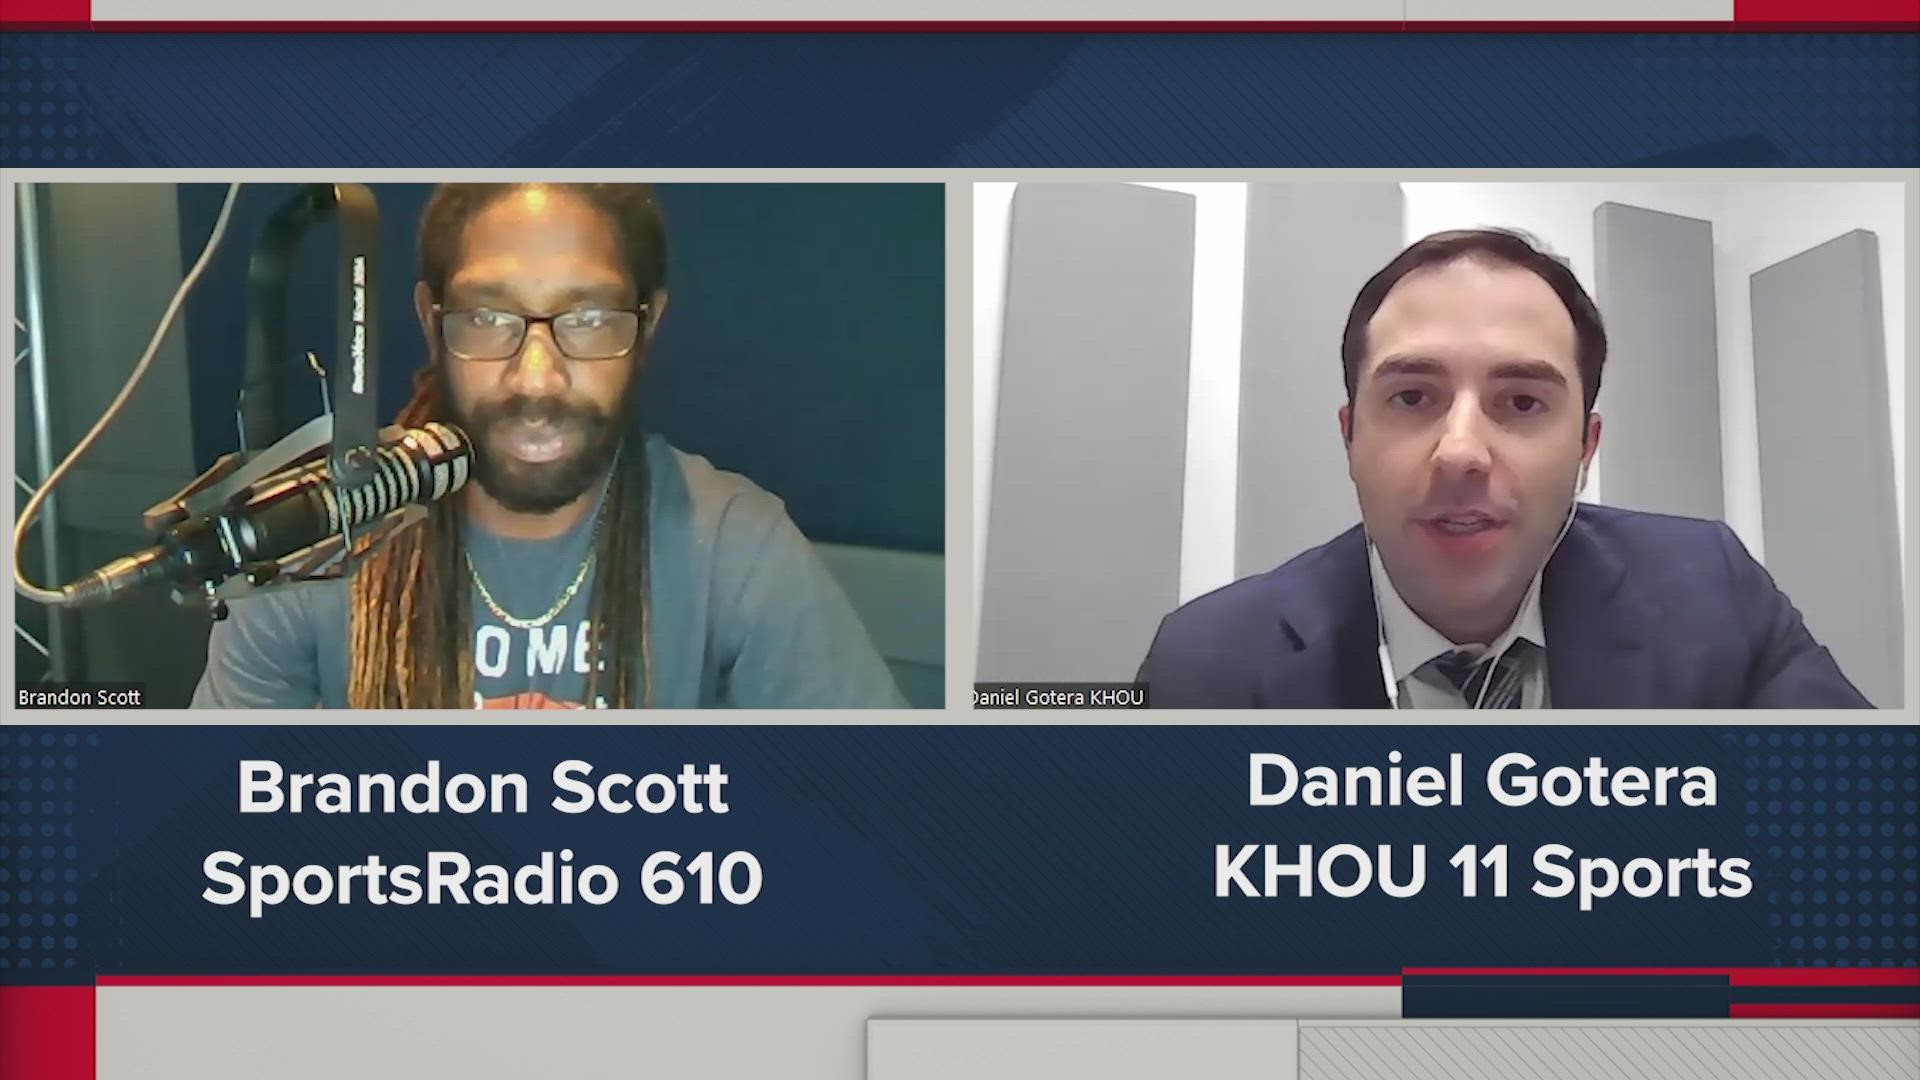 KHOU 11 Sports Reporter/Anchor catches up with Brandon Scott of SportsRadio 610 to talk Texans football and the drama surrounding wide receiver Brandin Cooks.